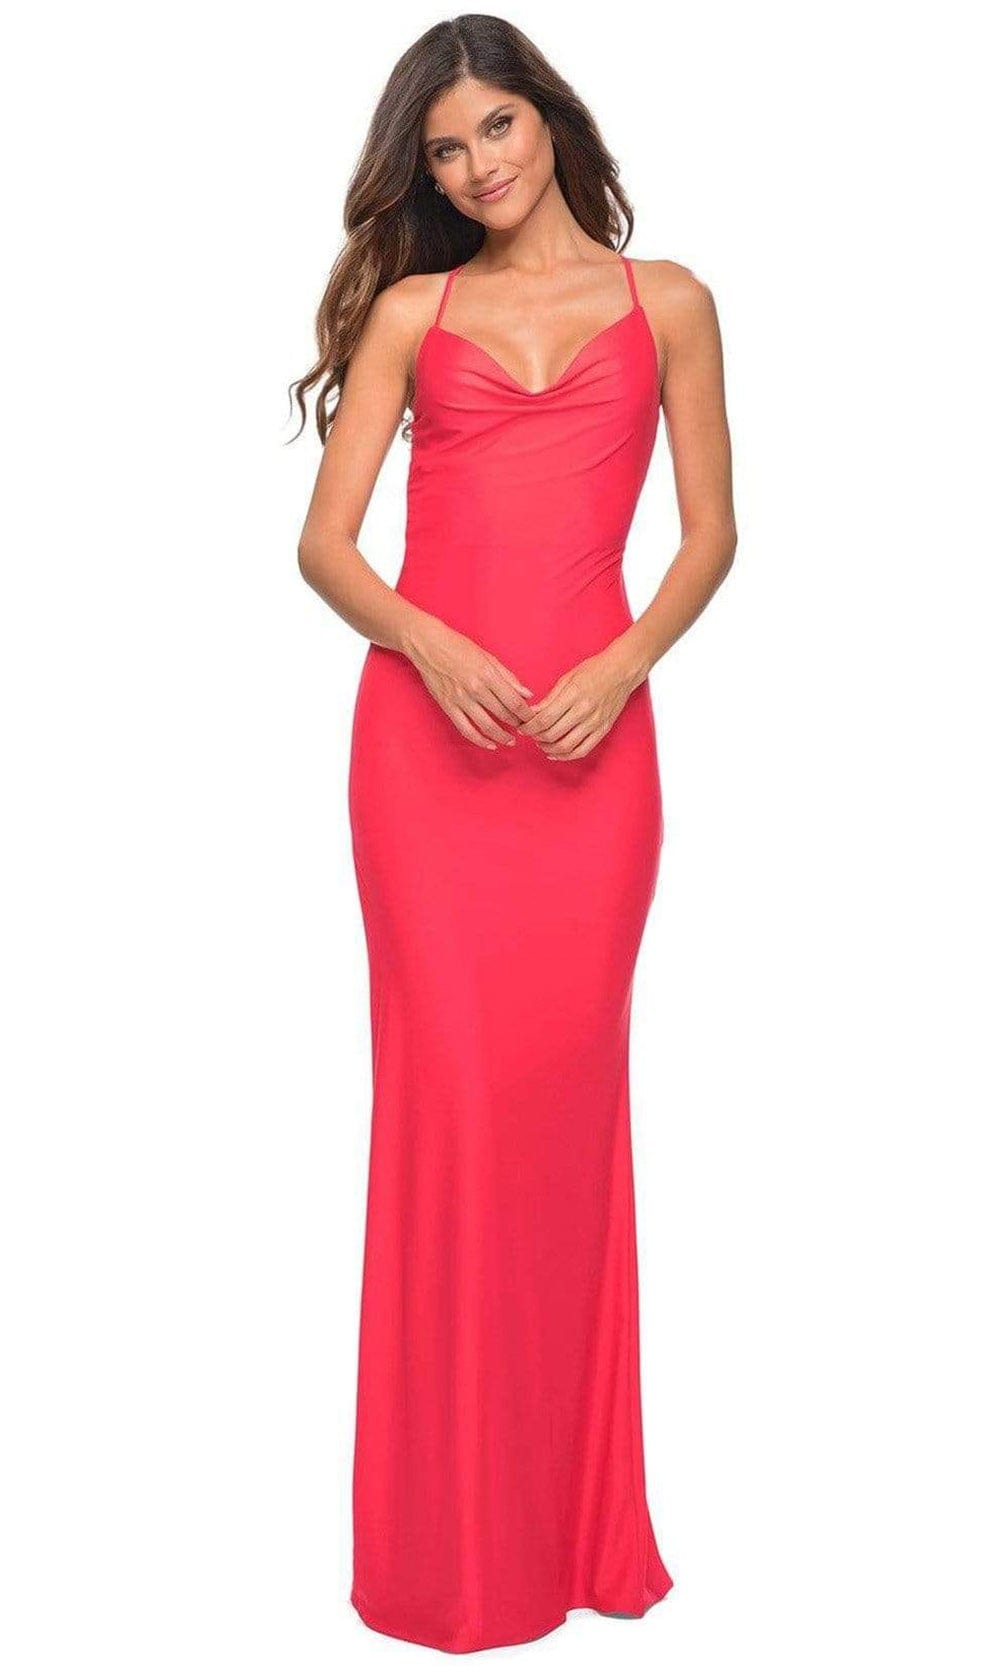 Image of La Femme - 30603 Cowl Neck Fitted Minimalist Gown